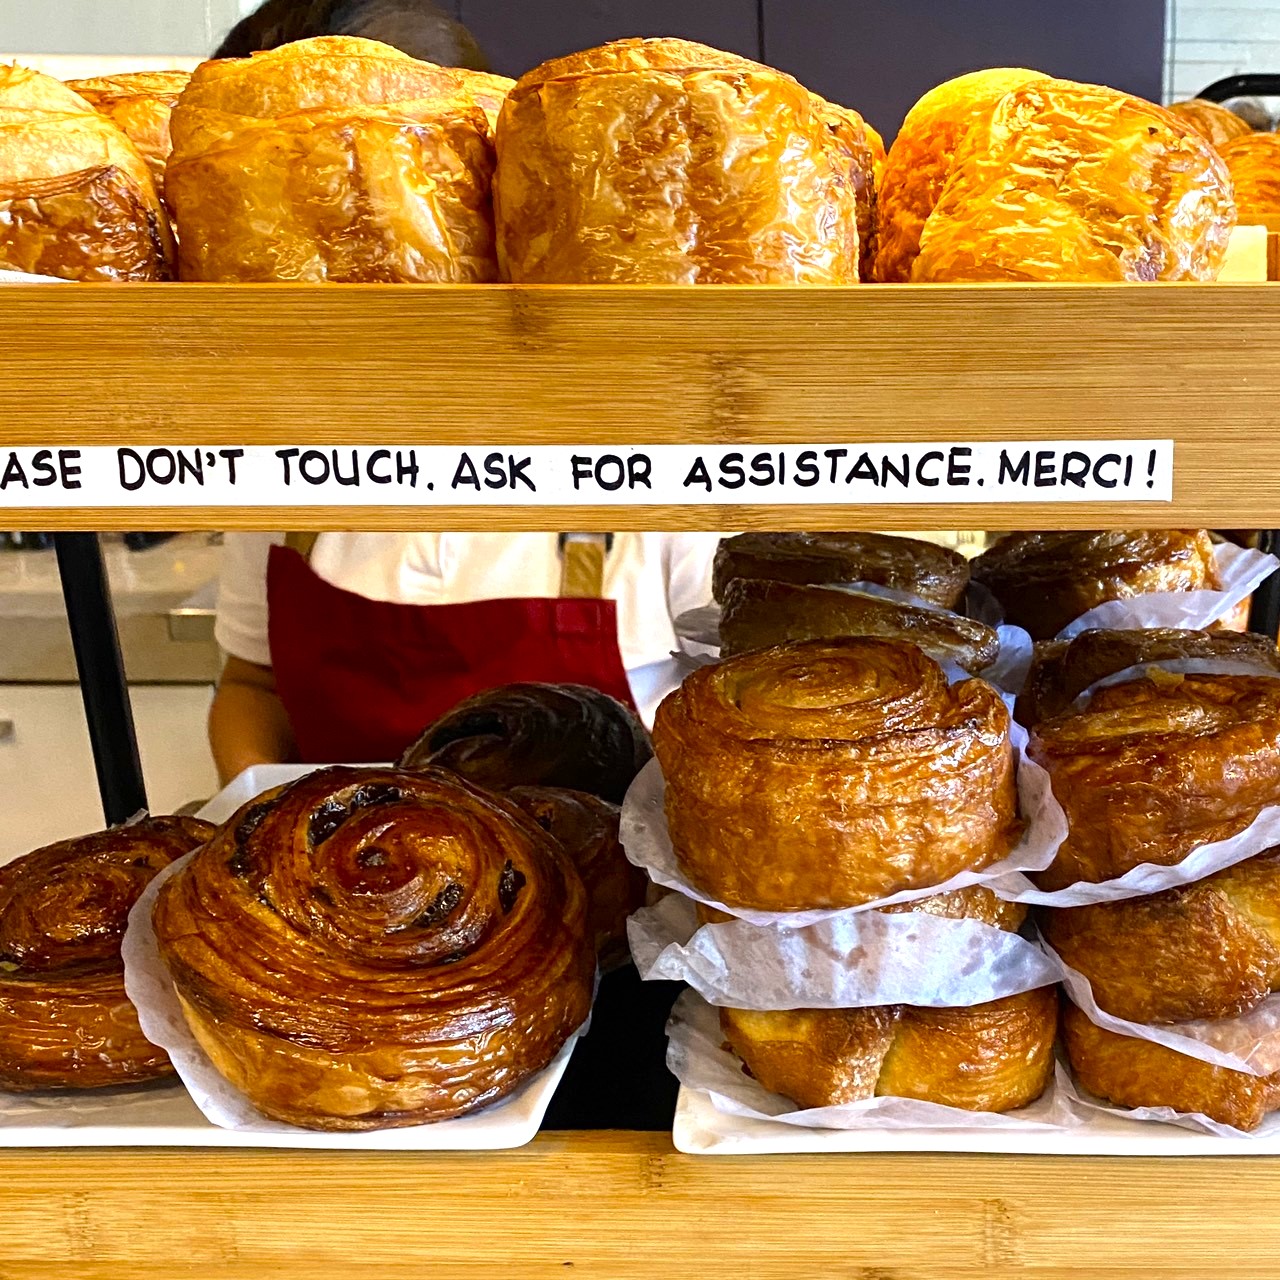 The owner is at the cafe every day to check on the progress. They provide high quality and reliable products.
Limited quantities of bread and cakes are baked every morning. If you want to get your hands on one, we recommend coming to the store early!